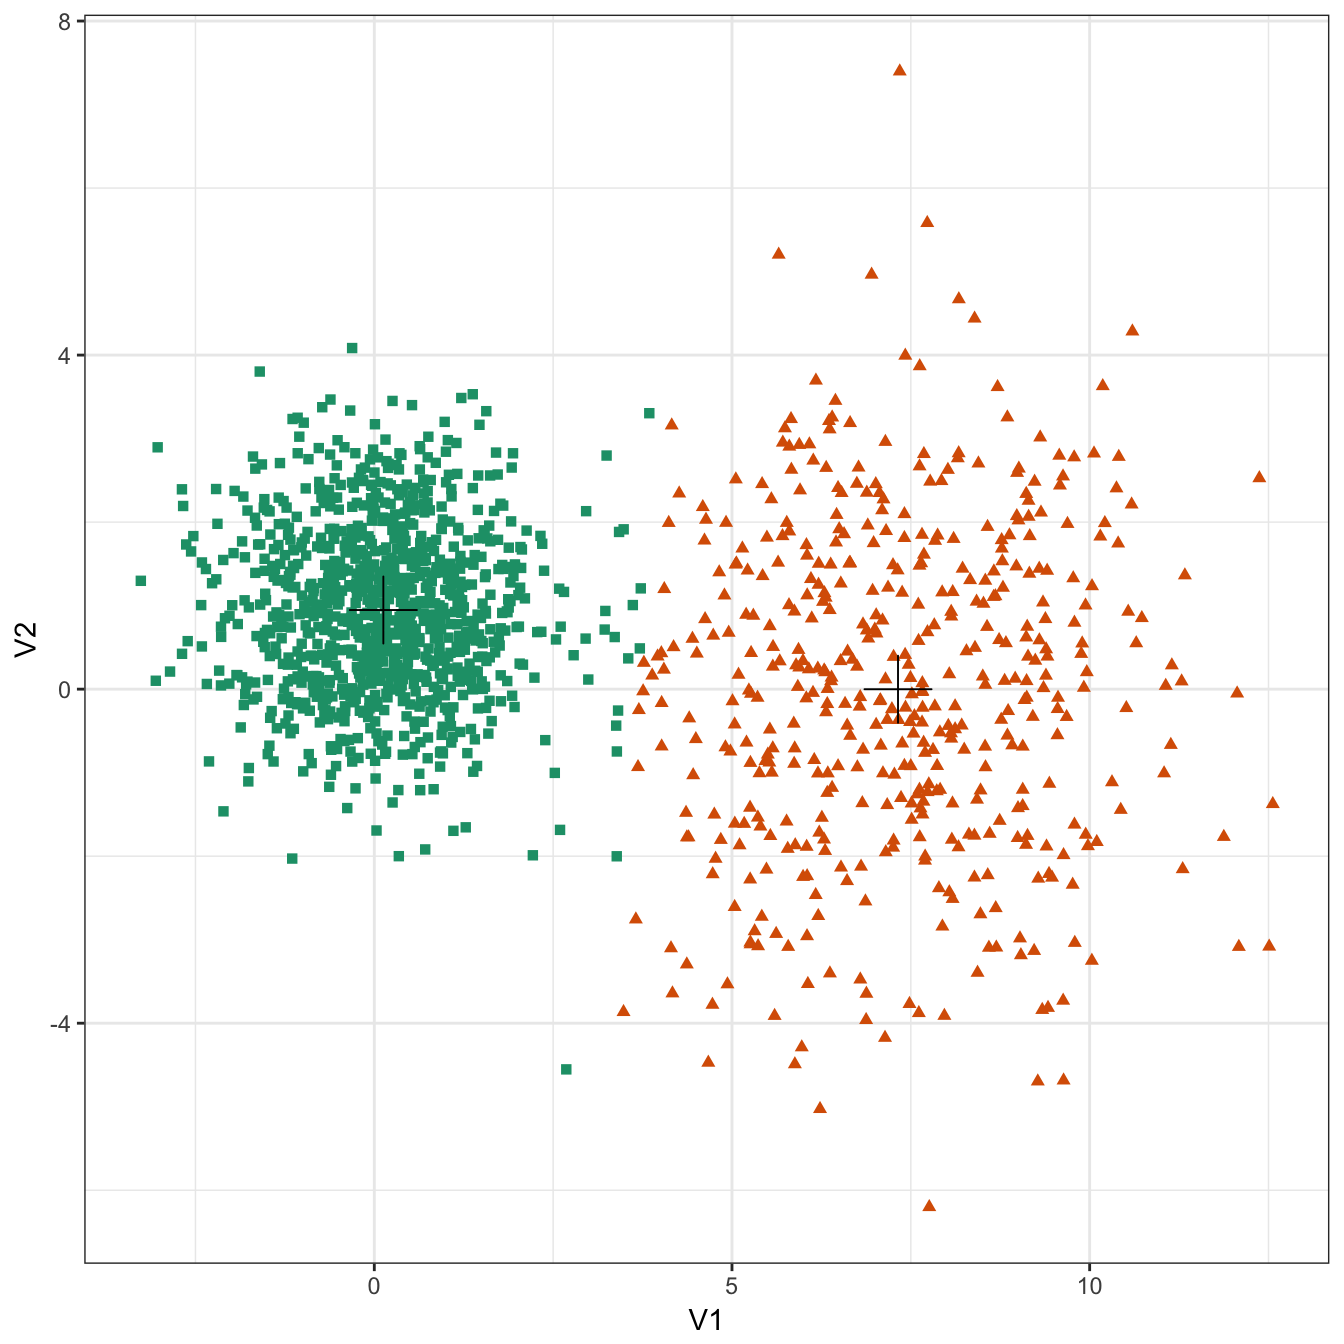 K-means clustering of the different density distributions data set: scatterplots of clusters for k=2 and k=3. Cluster centres indicated with a cross.